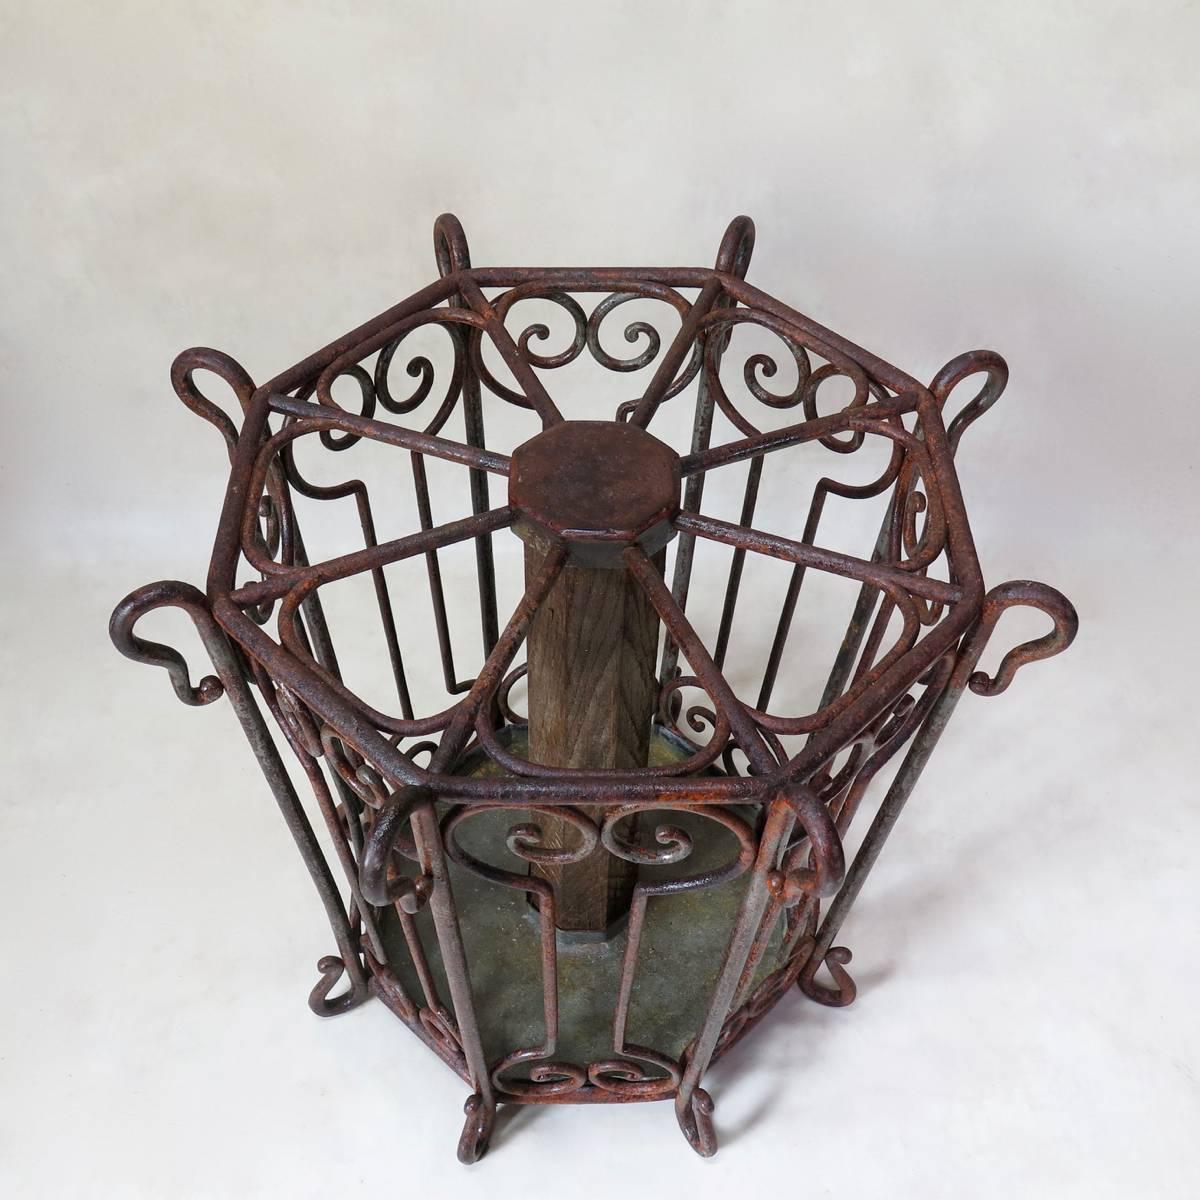 Rare and unusual large, circular umbrella stand made of heavy hand-wrought iron, with traces of original red paint. The stand has eight compartments arranged around a central oak shaft. Zinc-lined bottom.